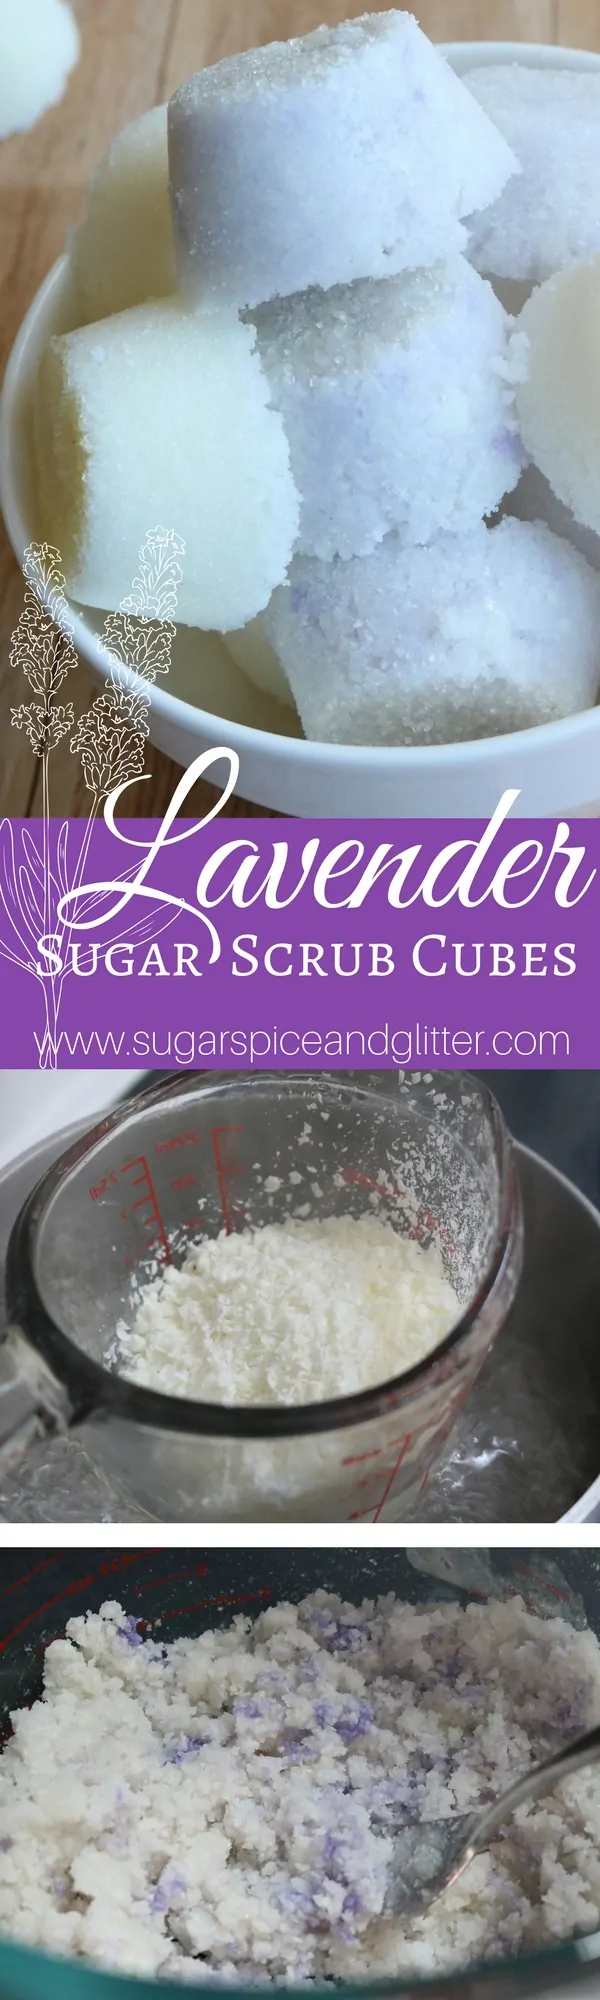 Homemade lavender sugar scrub cubes make a great homemade gift and are a good option for daily, gentle exfoliation. Add this to your homemade beauty product collection